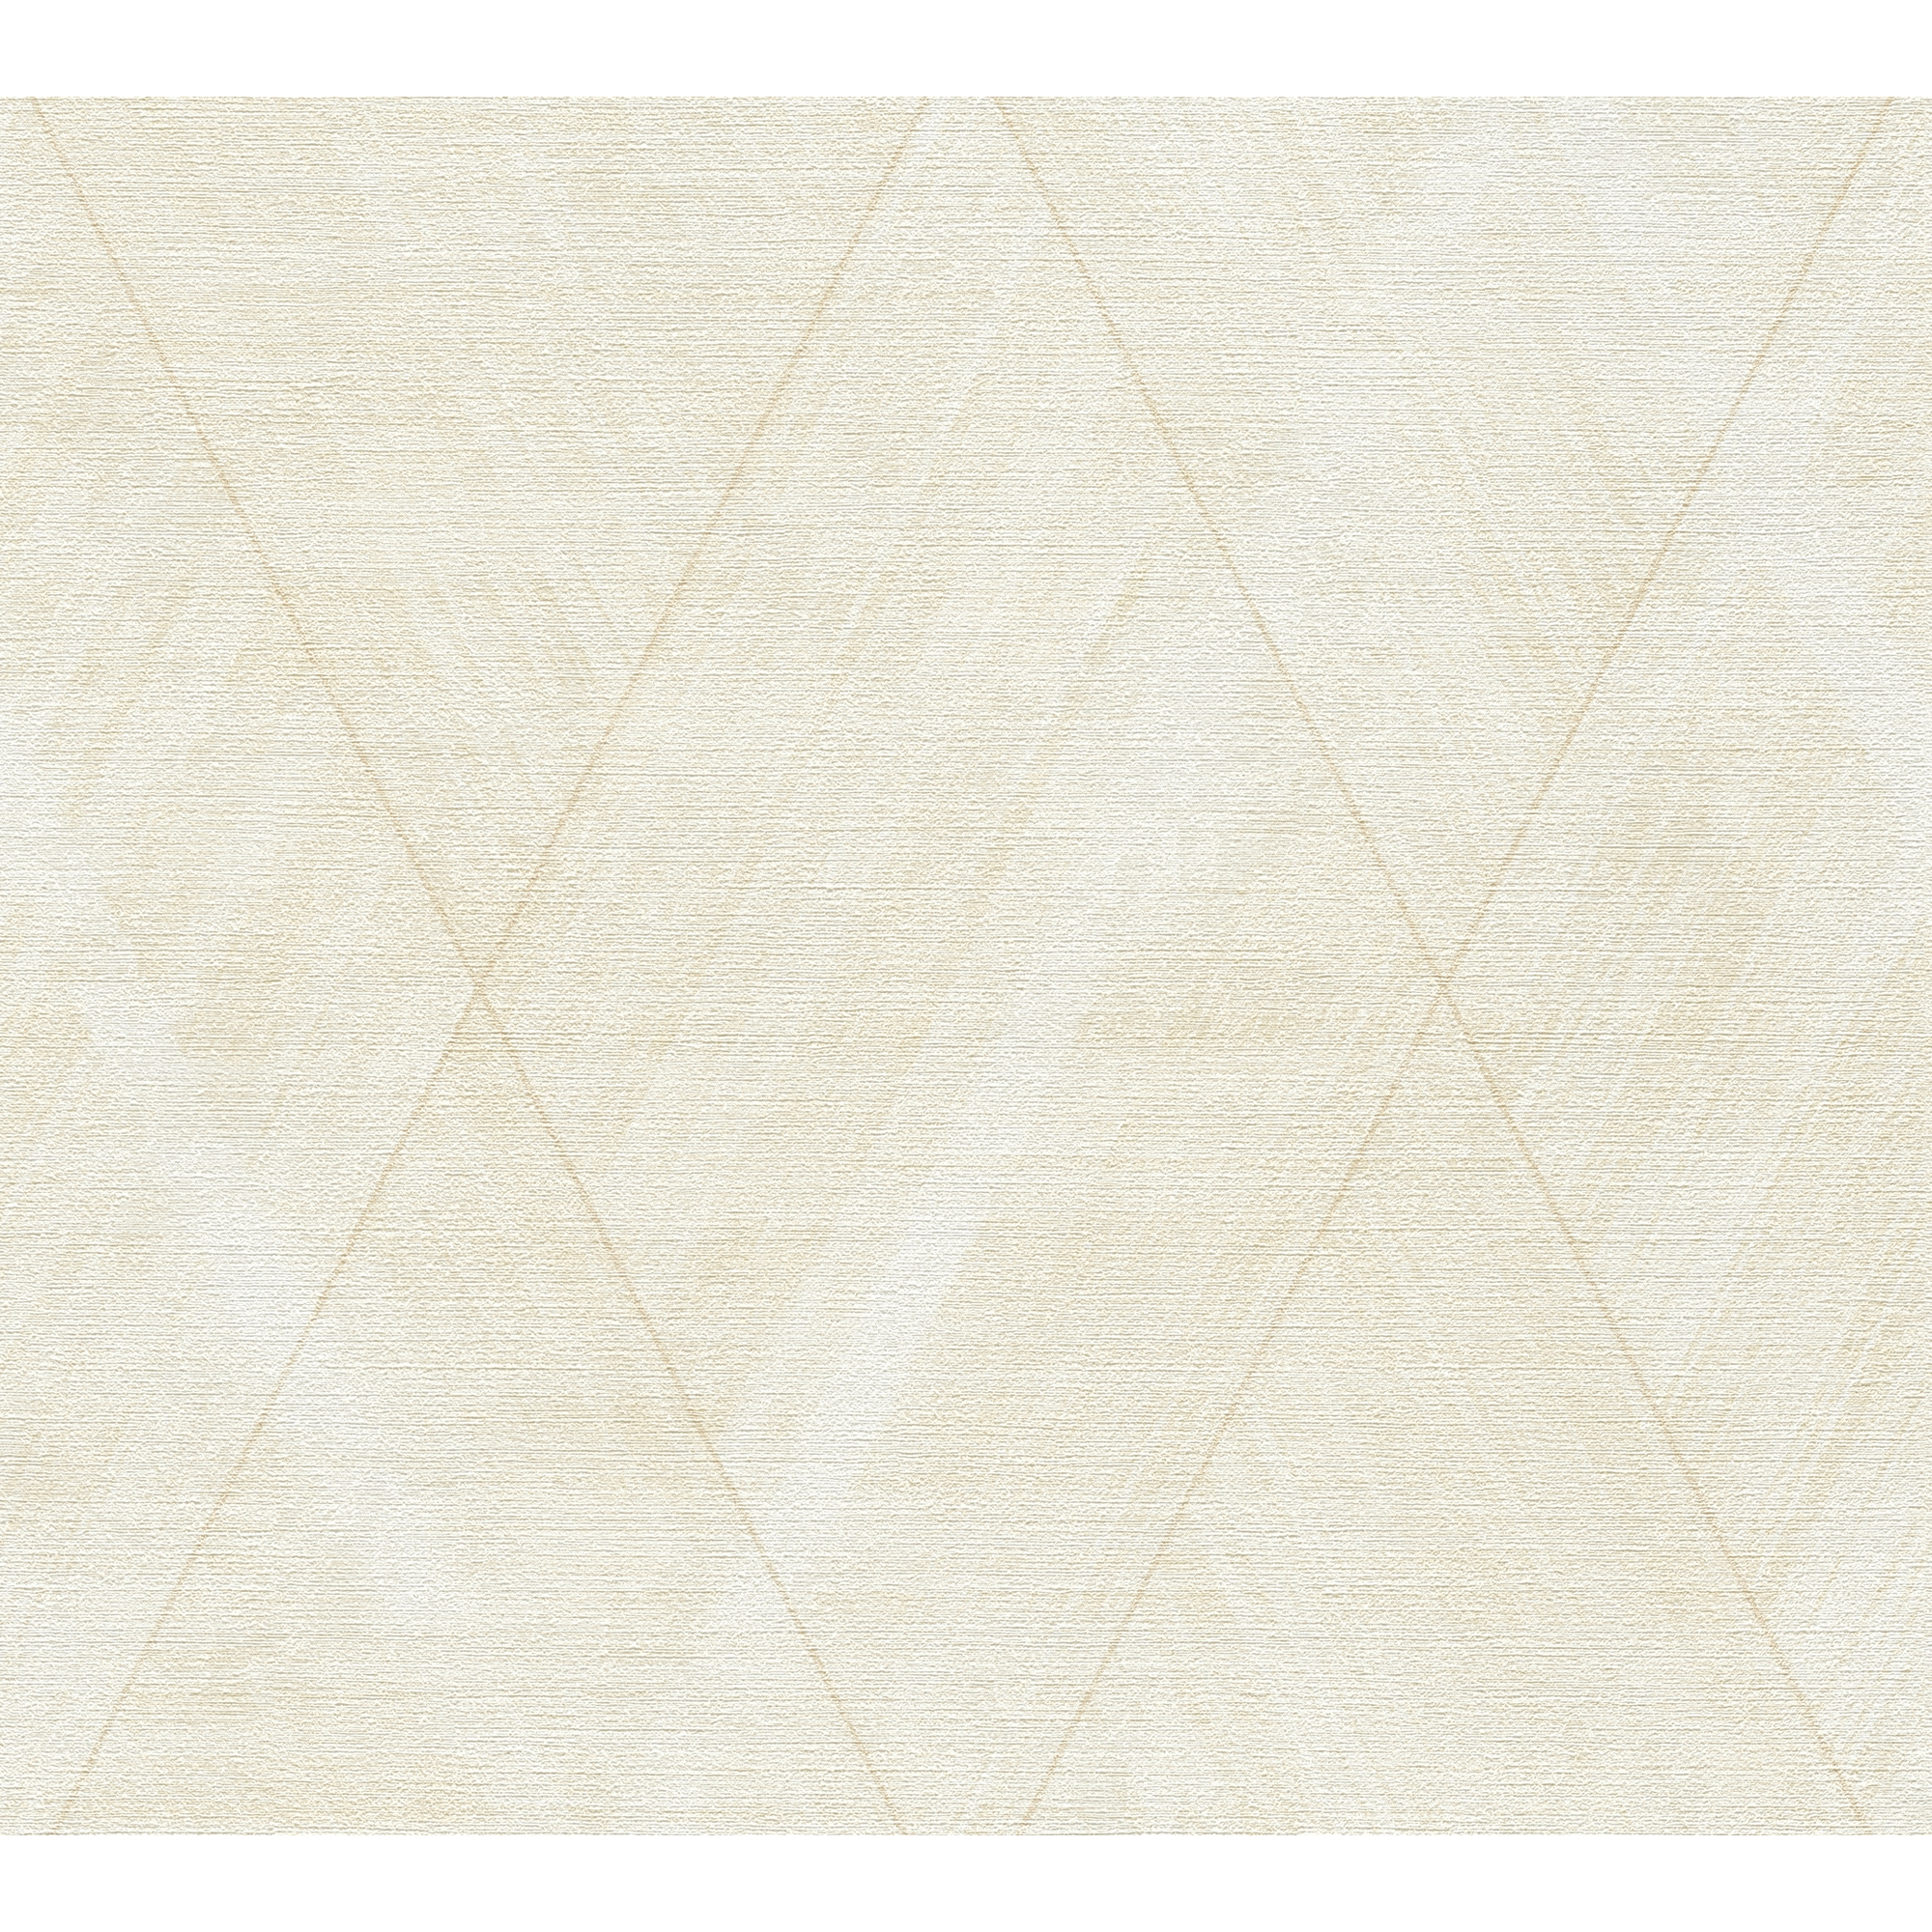 Vliestapete 'The BoS' Rautenmuster creme/beige 10,05 x 0,53 m + product picture